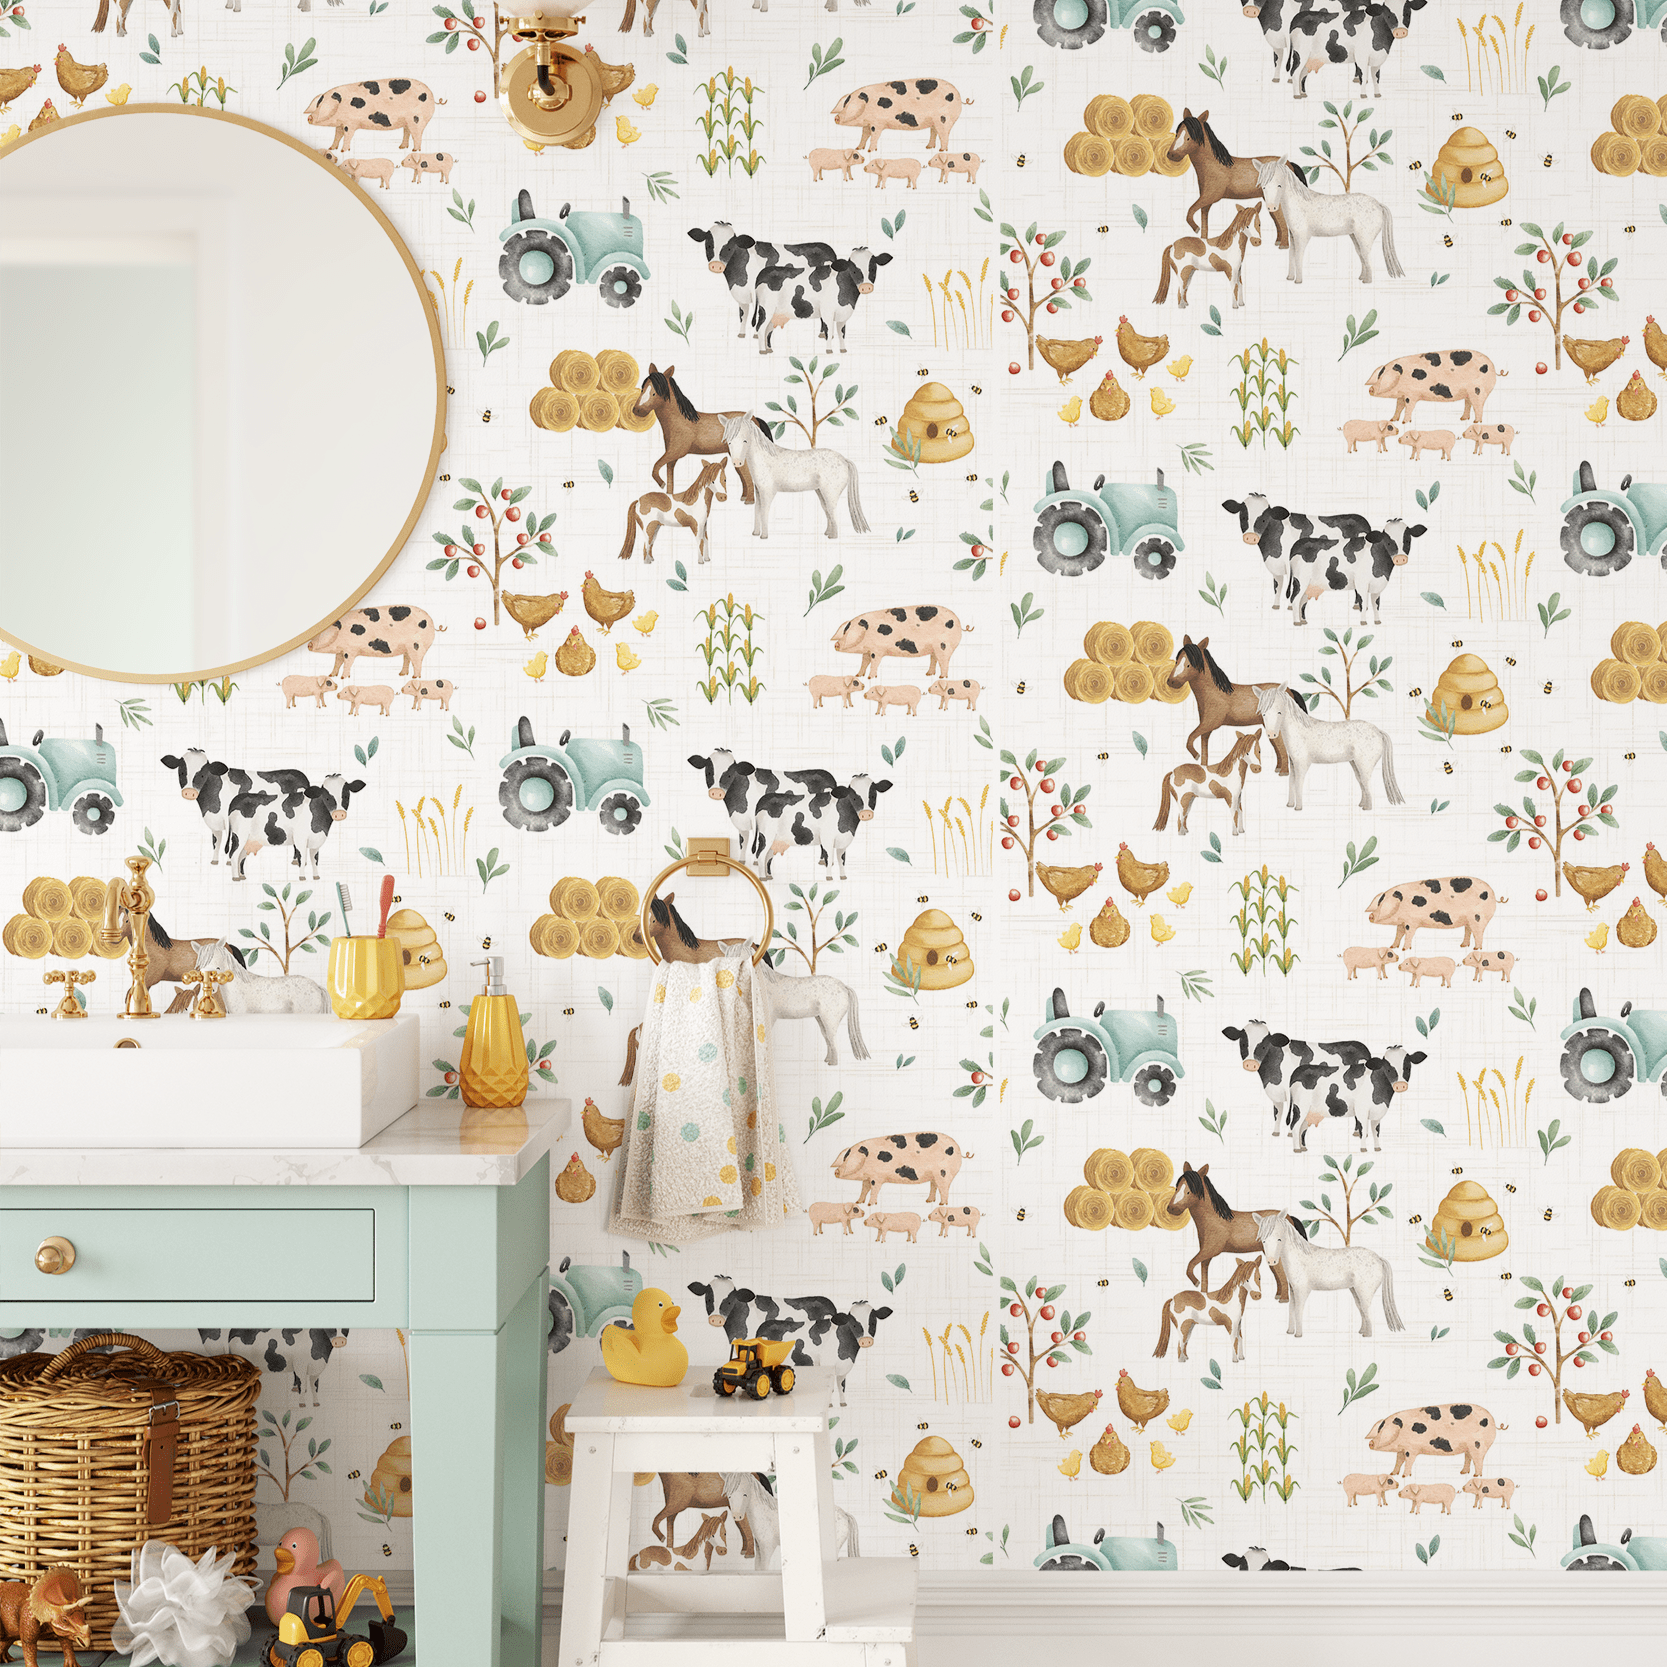 Farm animal wallpaper with cows, horses, pigs, chickens, bees, hay and tractors